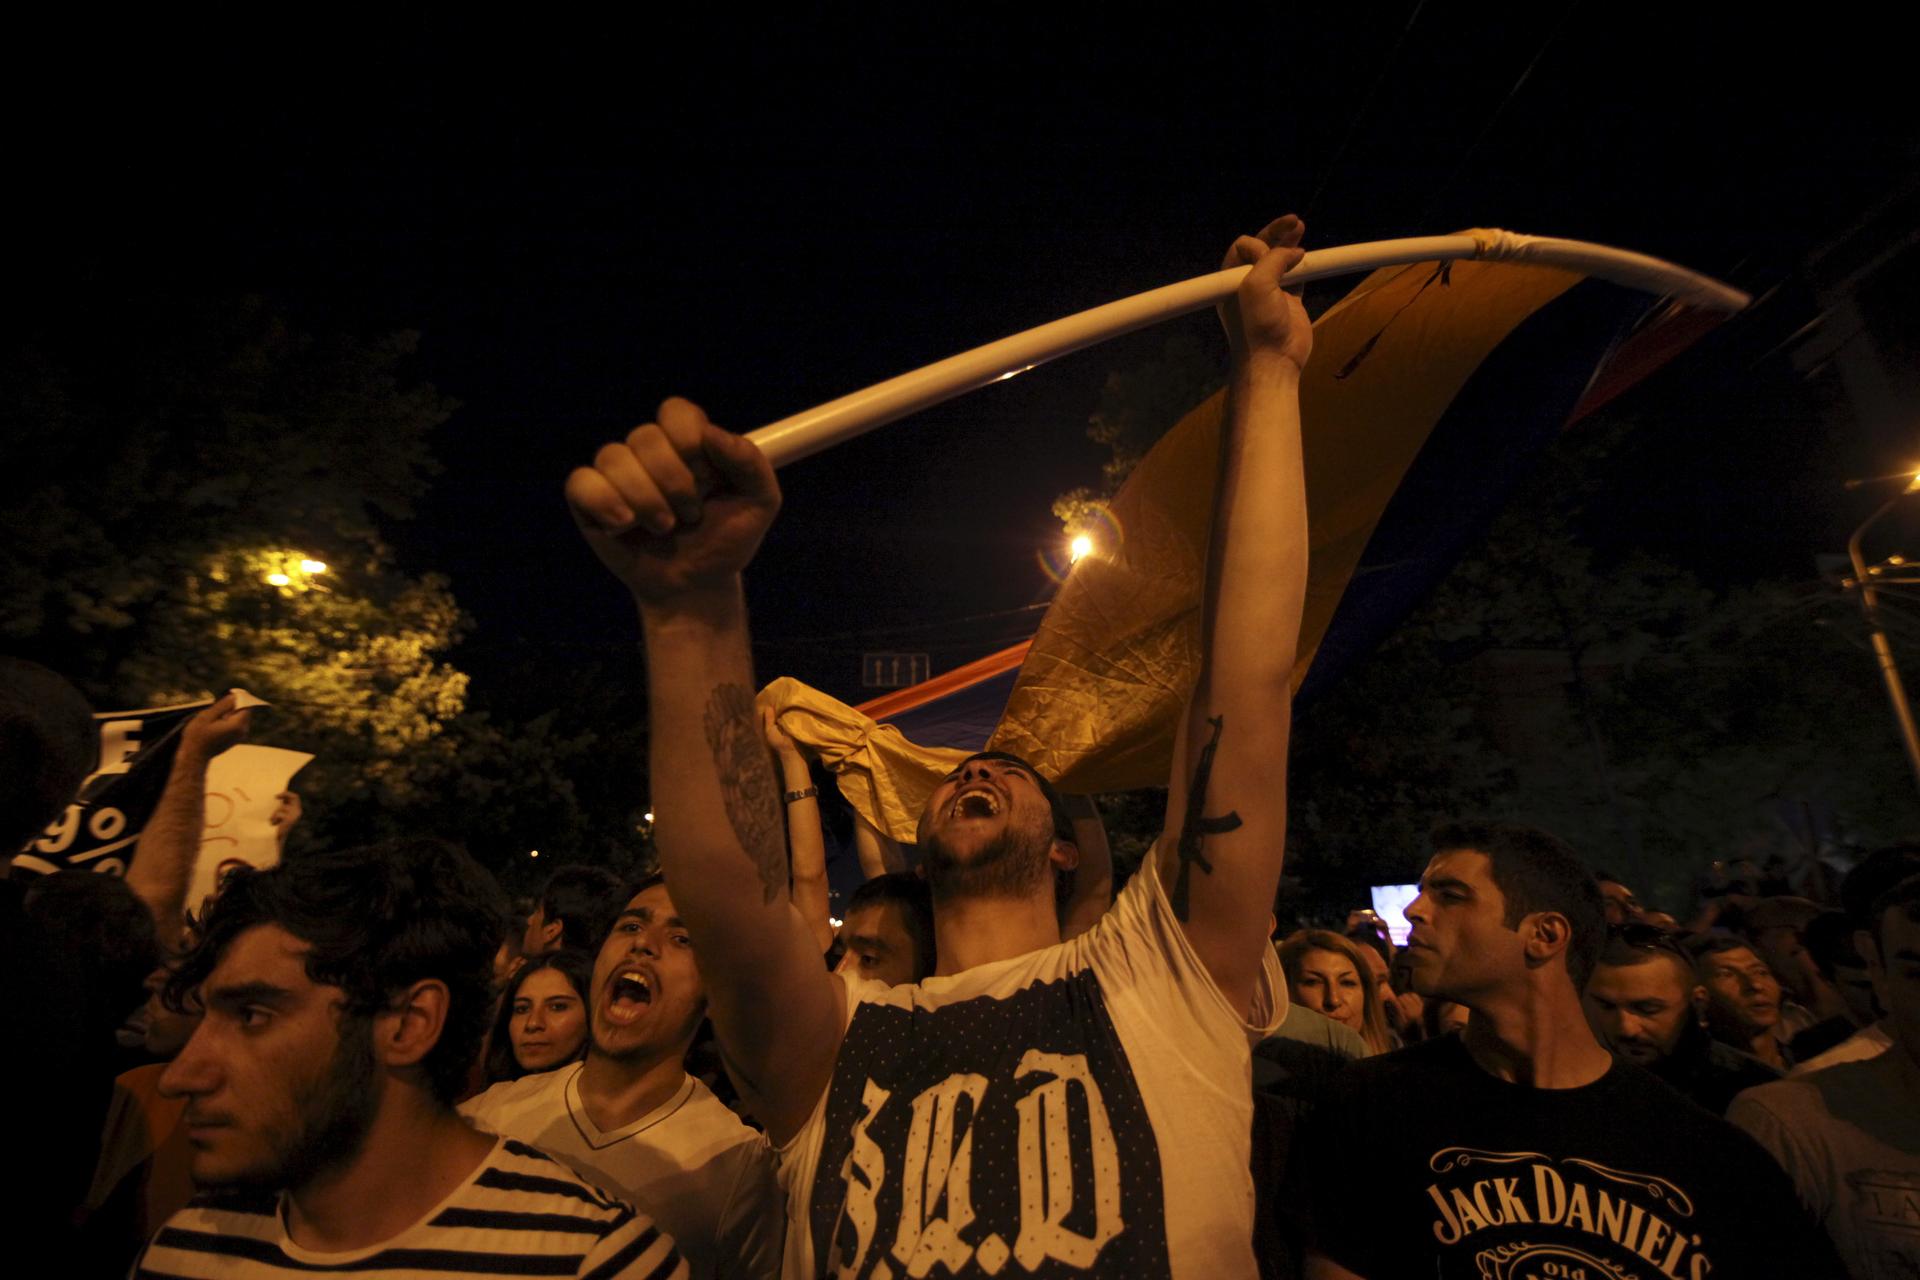 Thousands of Armenians staged a second day of protests on Tuesday in the capital Yerevan against a hike in electricity prices, defying police who used water cannon to try to disperse them.